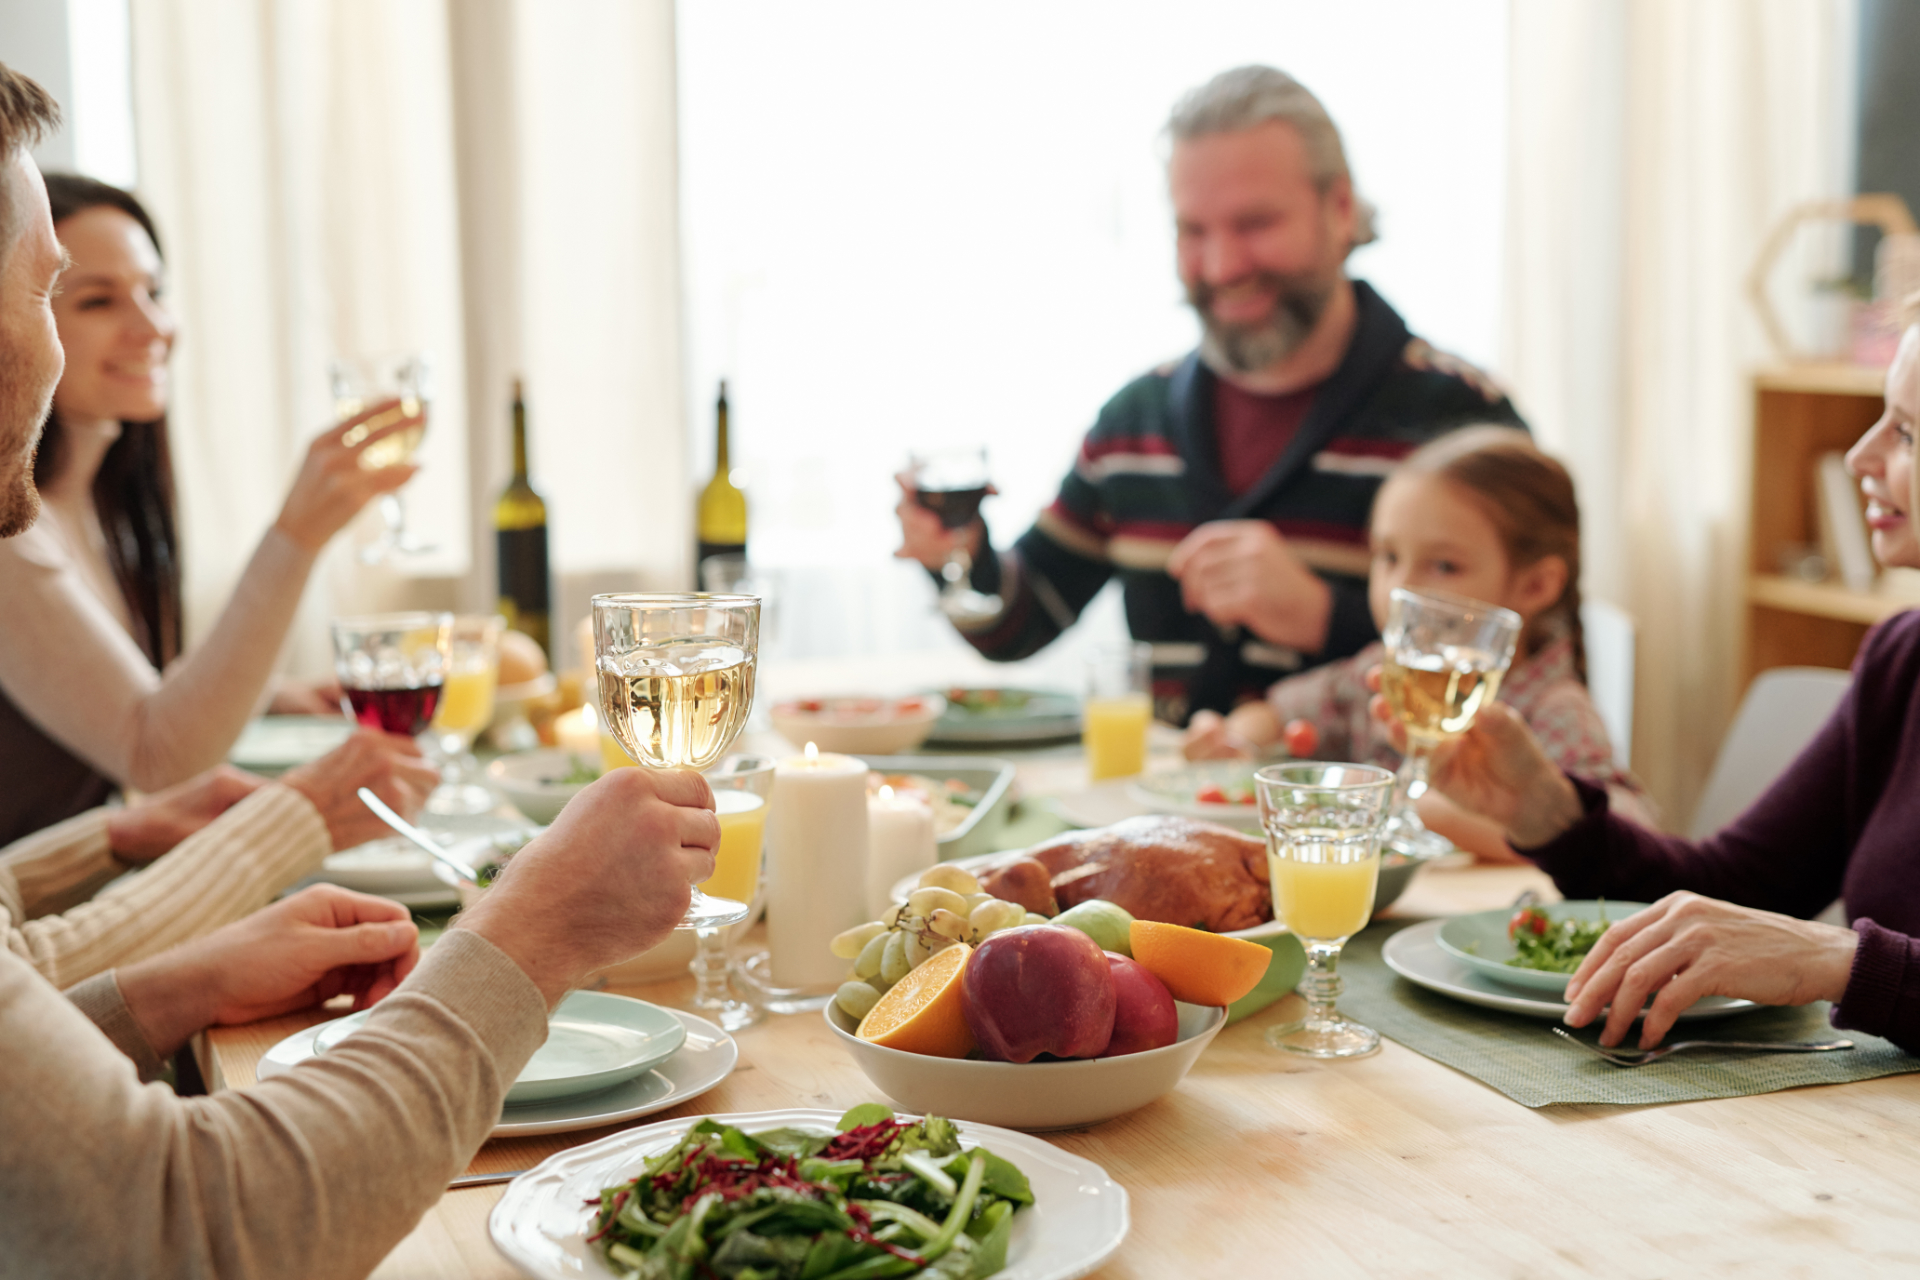 Hand of young man holding glass of wine over served table during toast at festive family dinner on Thanksgiving day